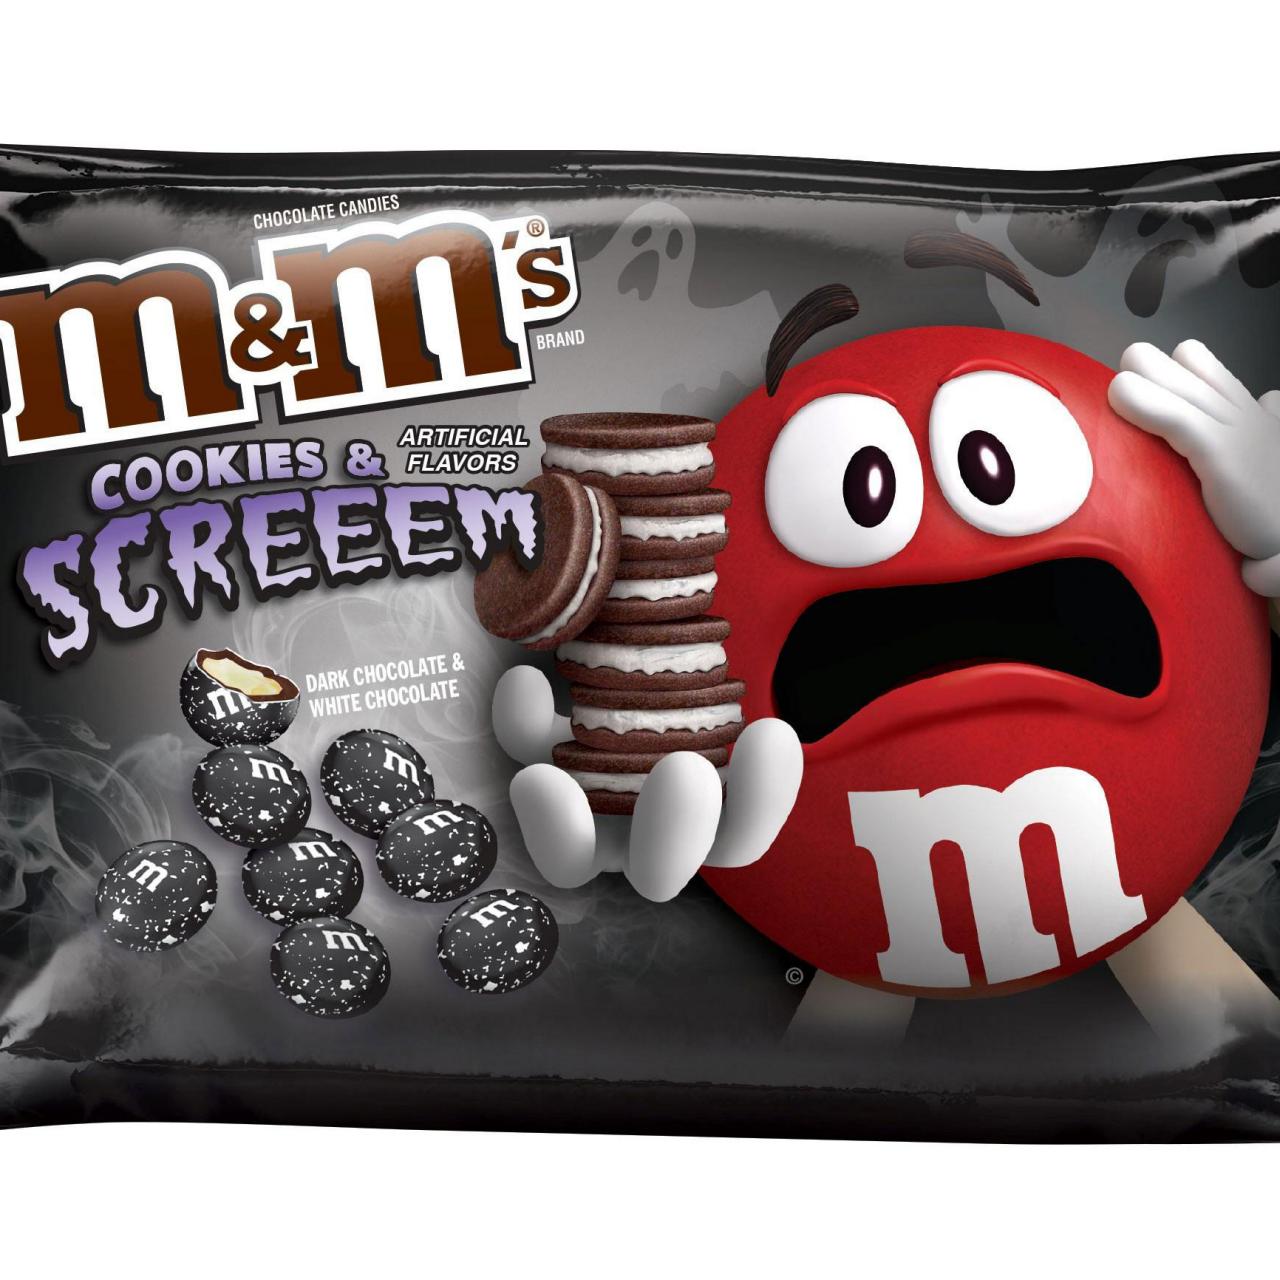 What's that white stuff in my m&ms??? : r/candy